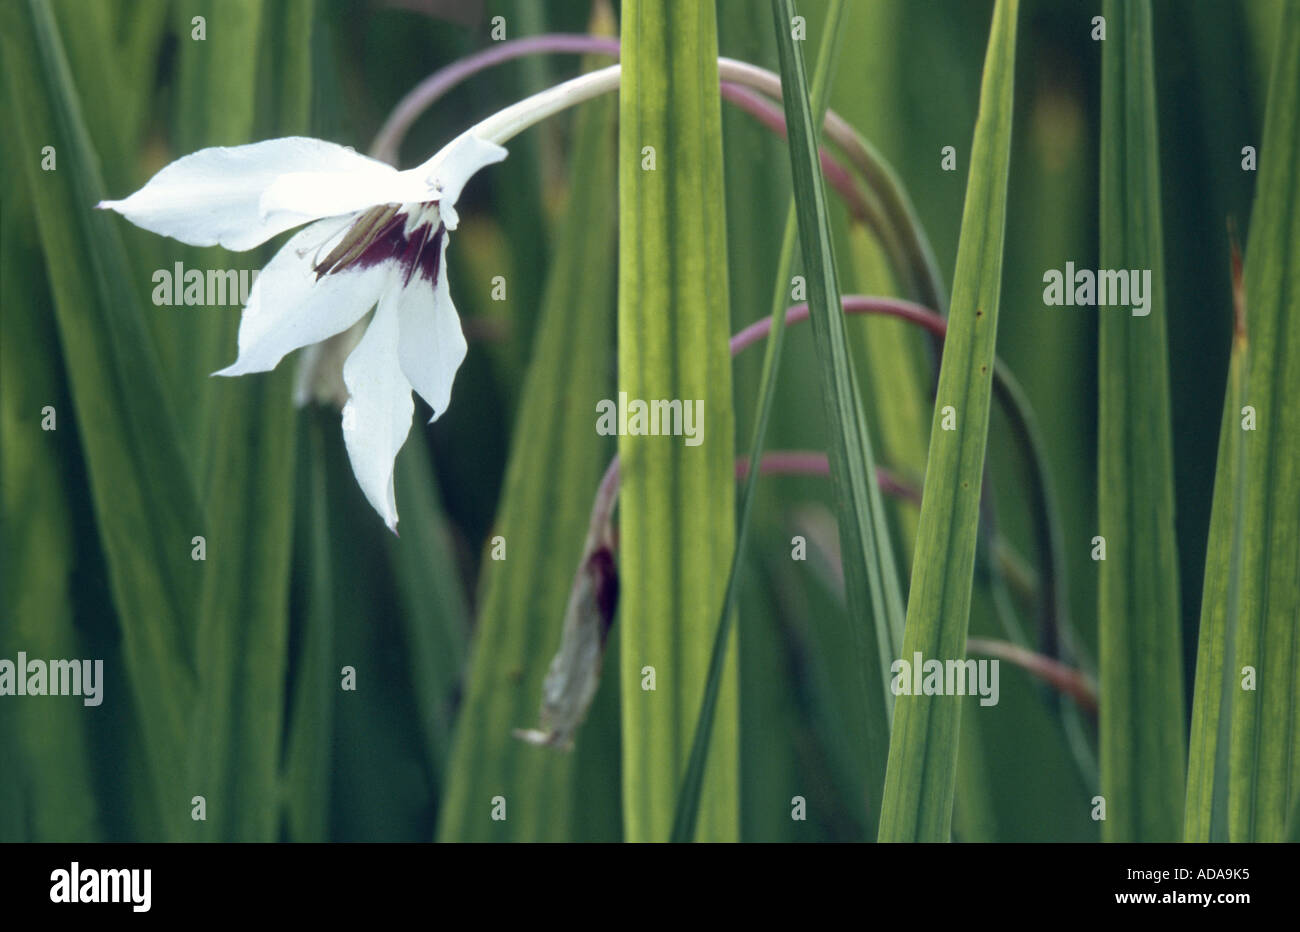 Peacock Orchid, Peacock Flower, Abyssinian gladiolus (Gladiolus bicolor, Acidanthera bicolor), flower Stock Photo